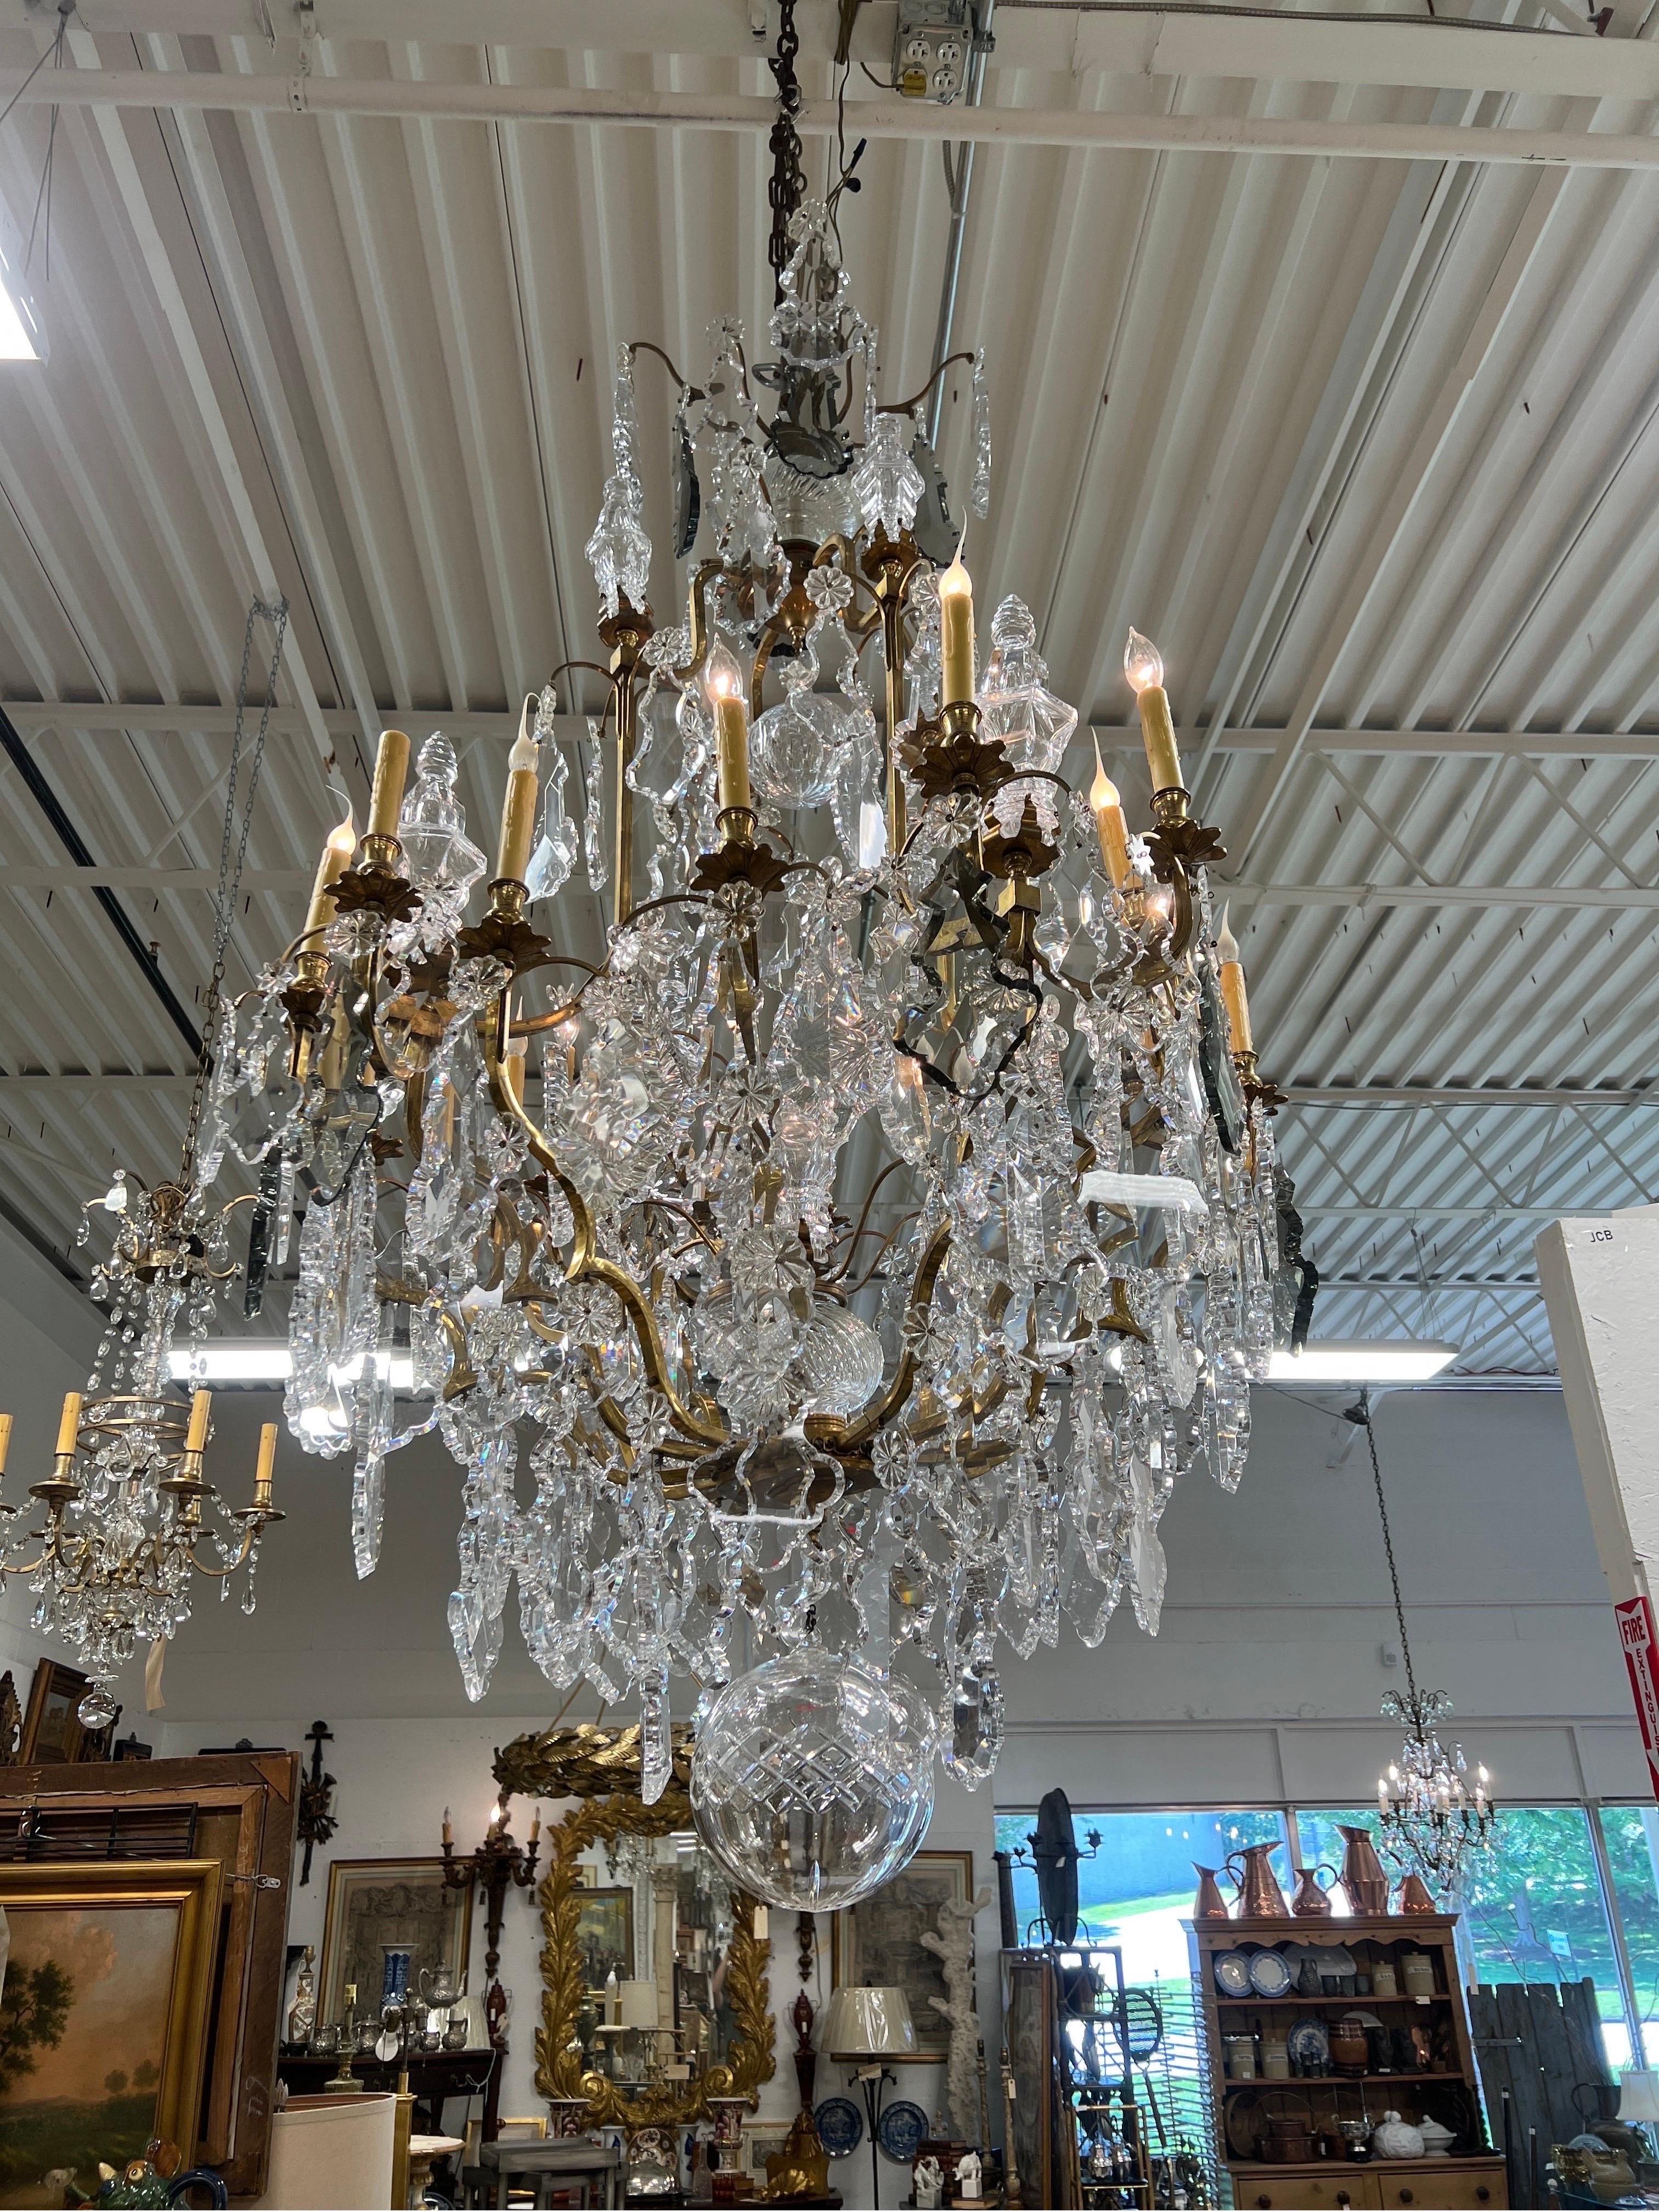 French, 19th century. This palatial antique Baccarat style chandelier is adorned with tremendous cut crystal prisms sizes ranging from 3.5-8.5” in clear and smokey glass. Large crystal newel post style finials are mounted across two tiers of the